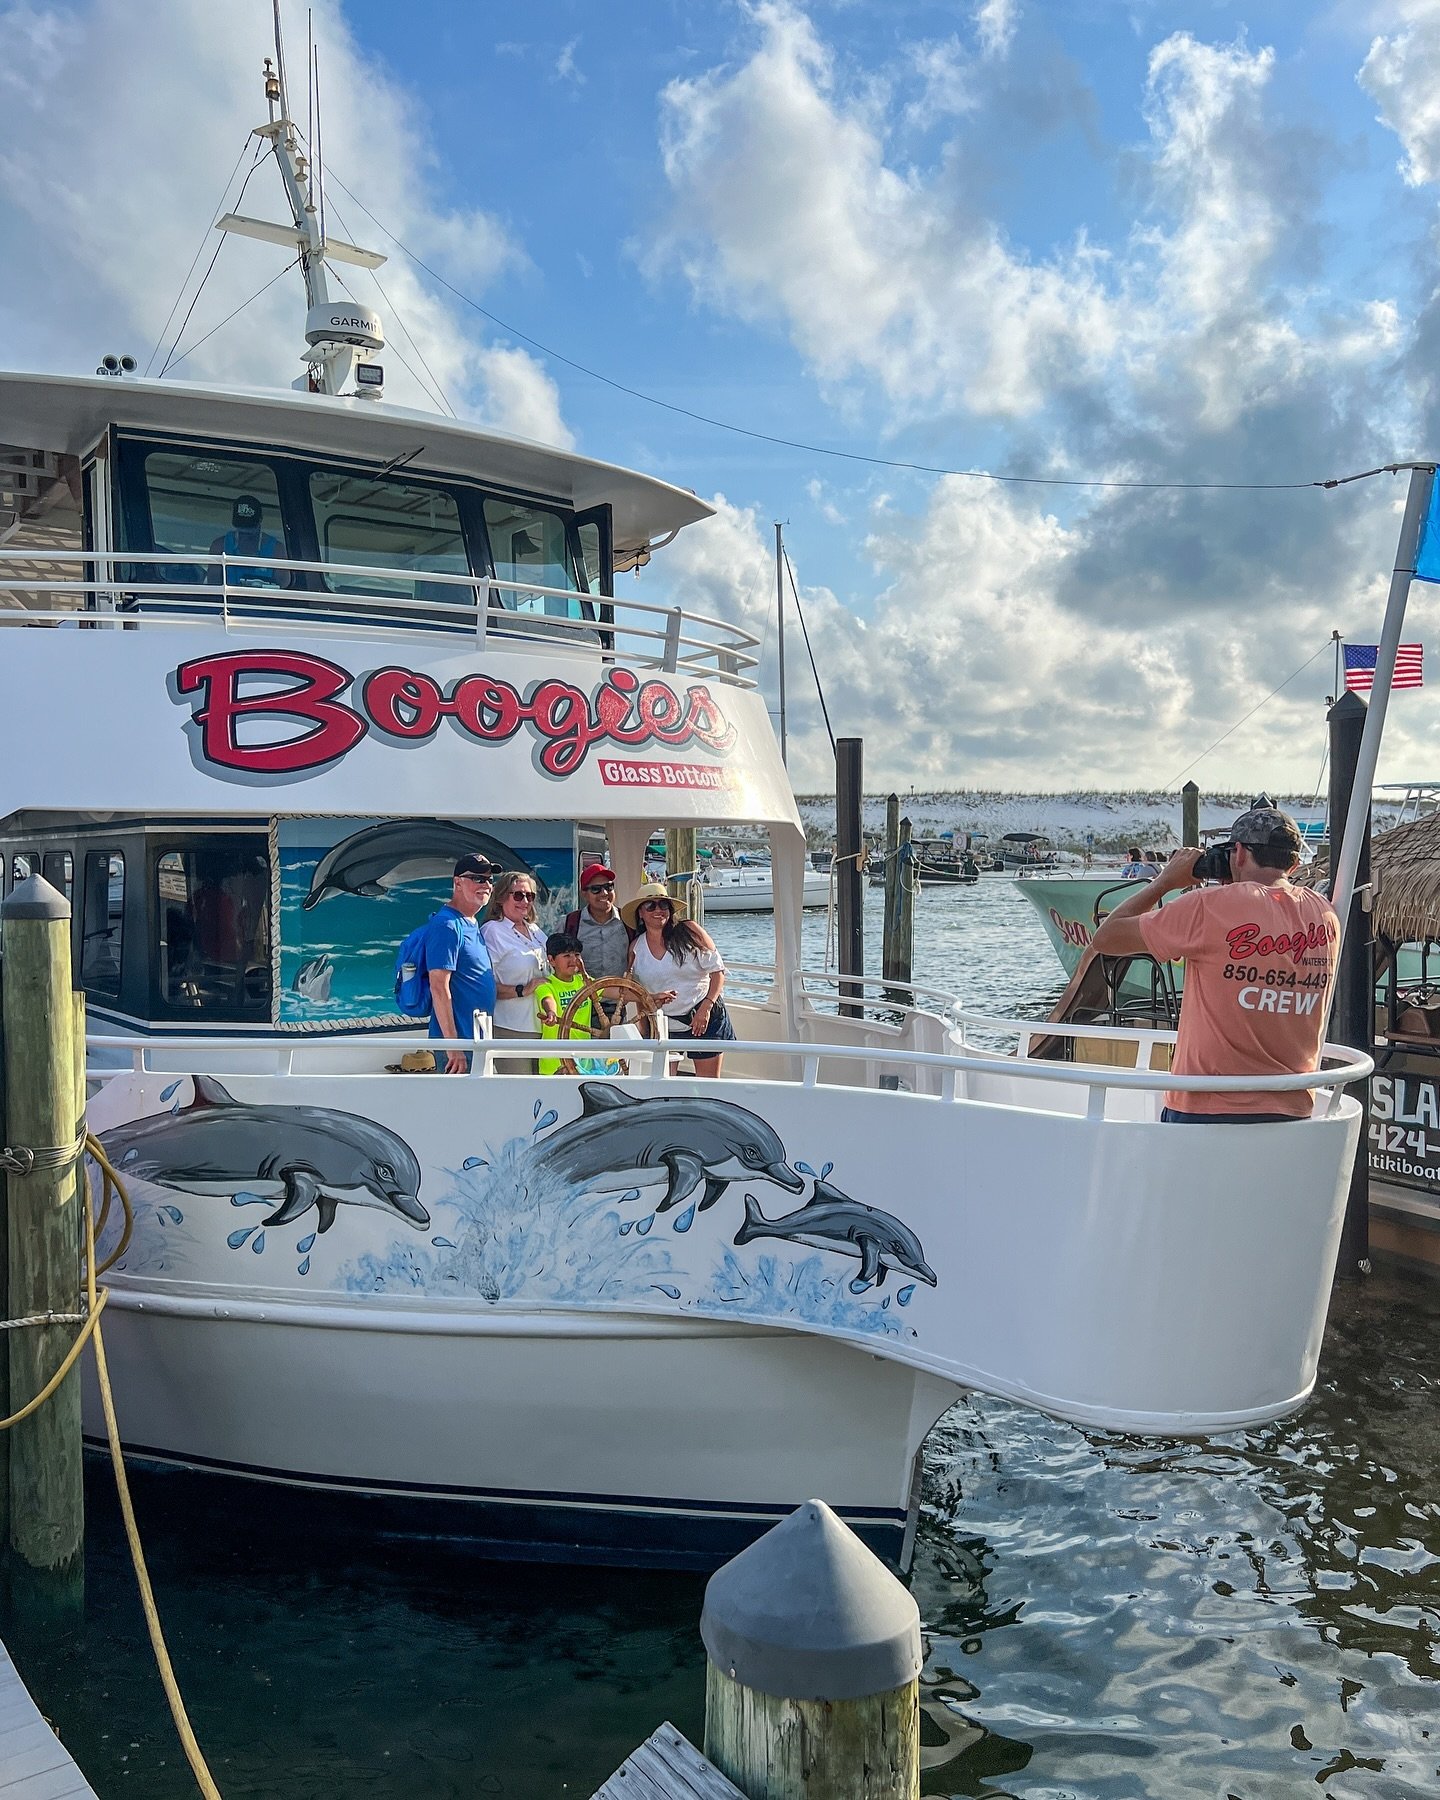 📸🐬🚢 Say dolphin! At Boogies Watersports, we believe in capturing every precious moment of your adventure on the water. From the smiles on your faces to the breathtaking views, our crew is dedicated to preserving your memories for a lifetime. Next 